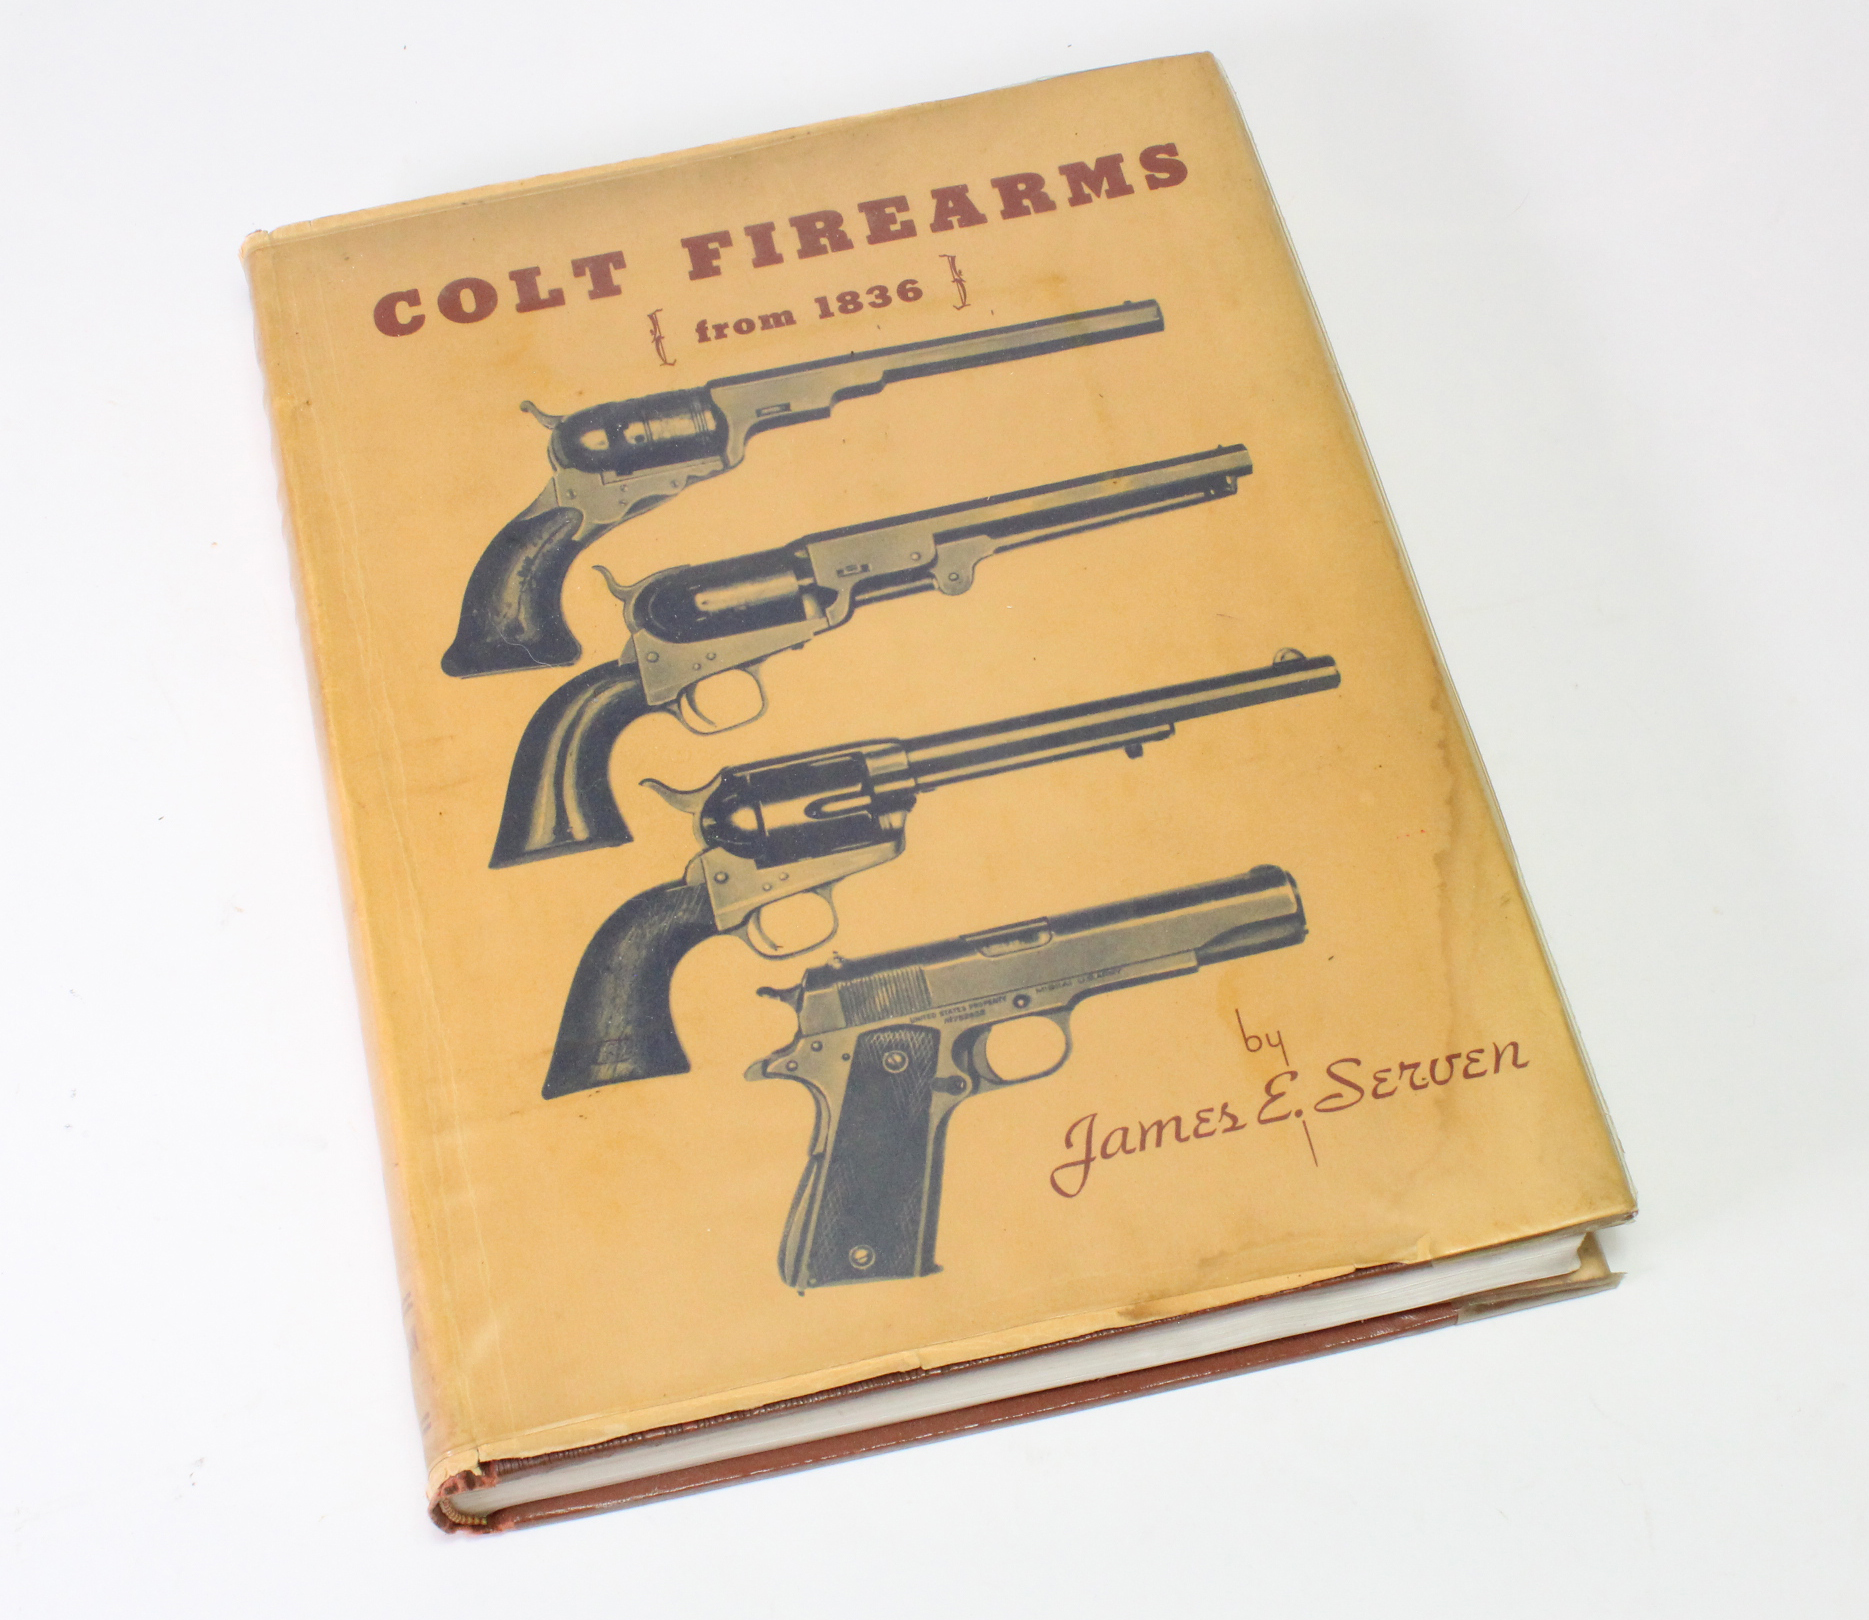 Gun related book Colt firearms from 1836 by James E Sewen scarce book full of information.